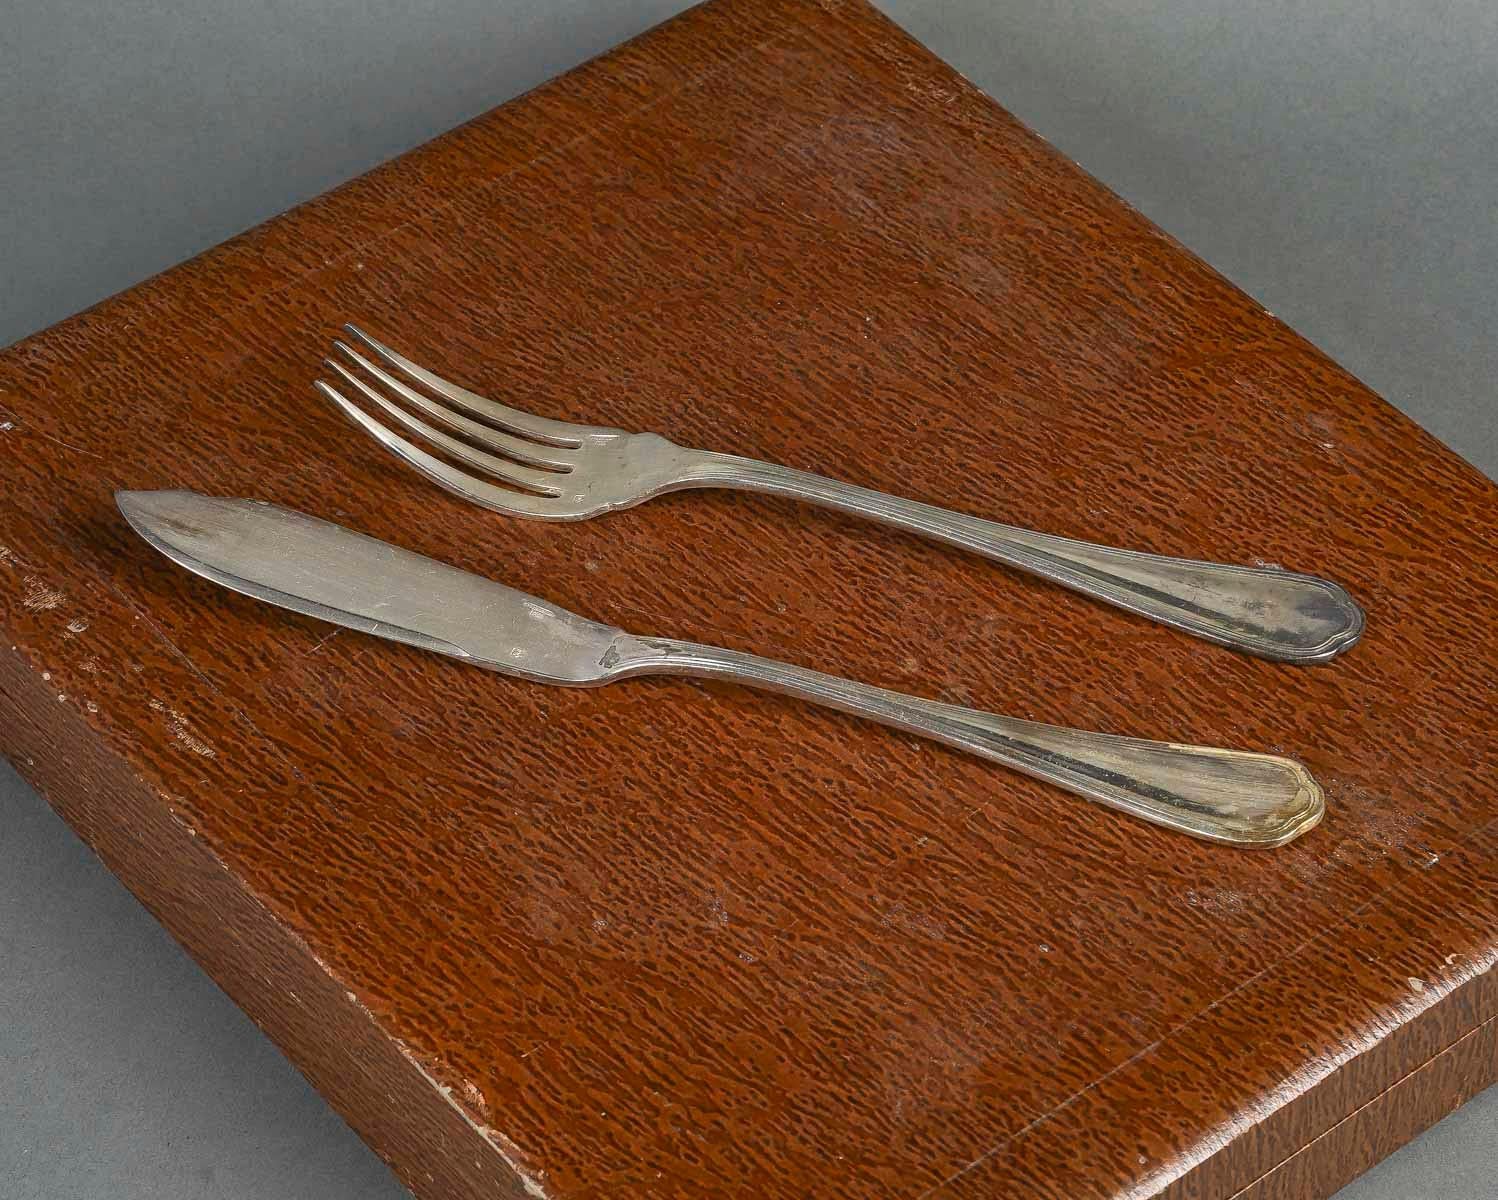 Modern Fish Service with 12 Forks and 12 Fish Knives by the Silversmith Christofle. For Sale